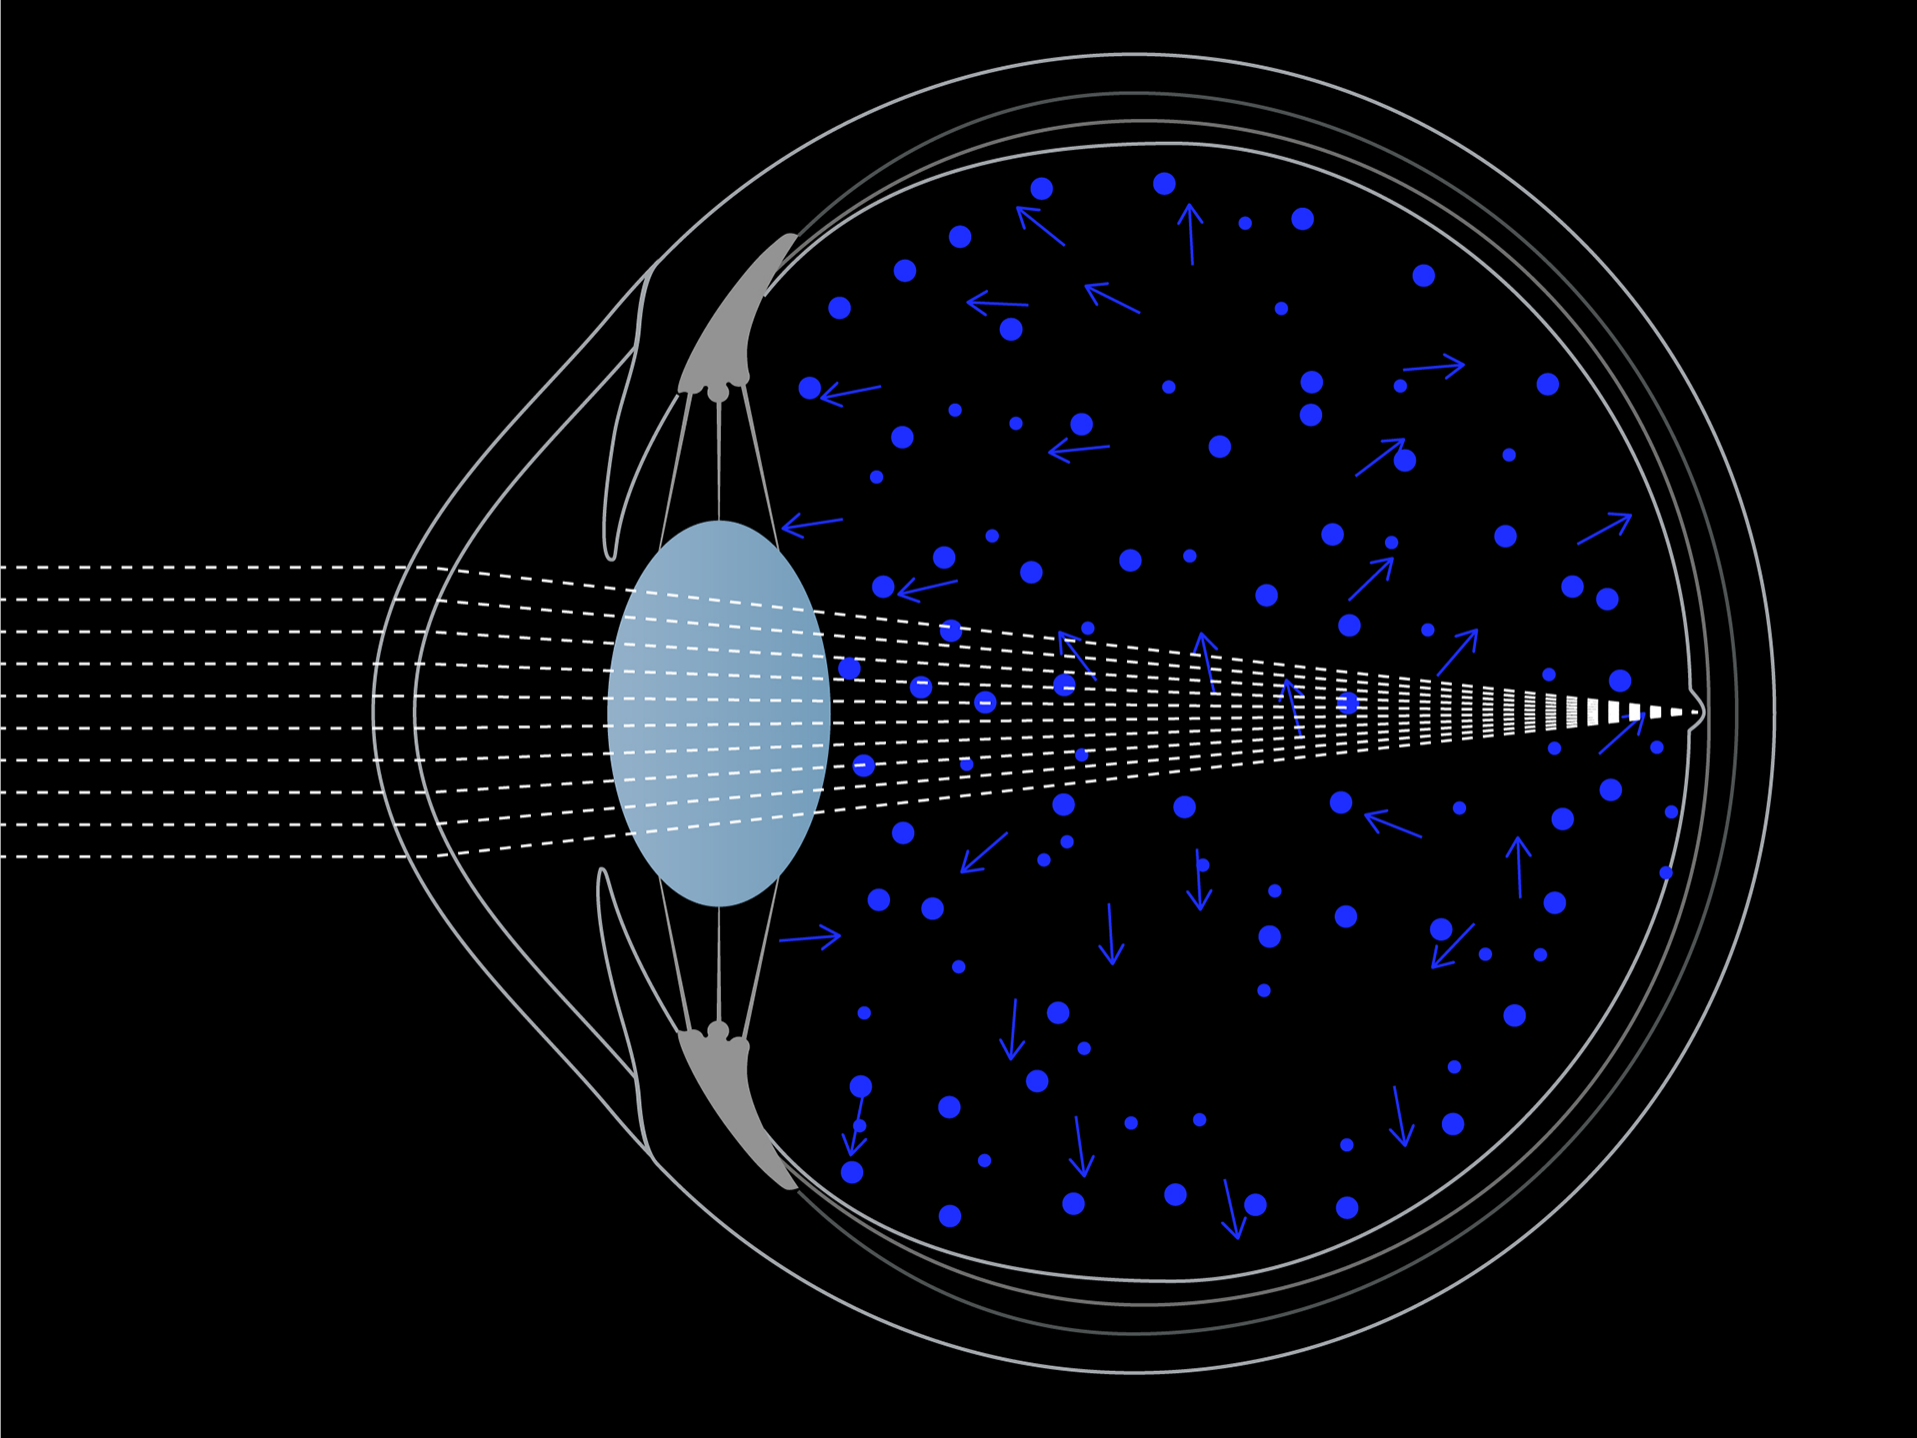 Illustration of light entering the eye, showing how blue light scatters more throughout the eye than white light. 